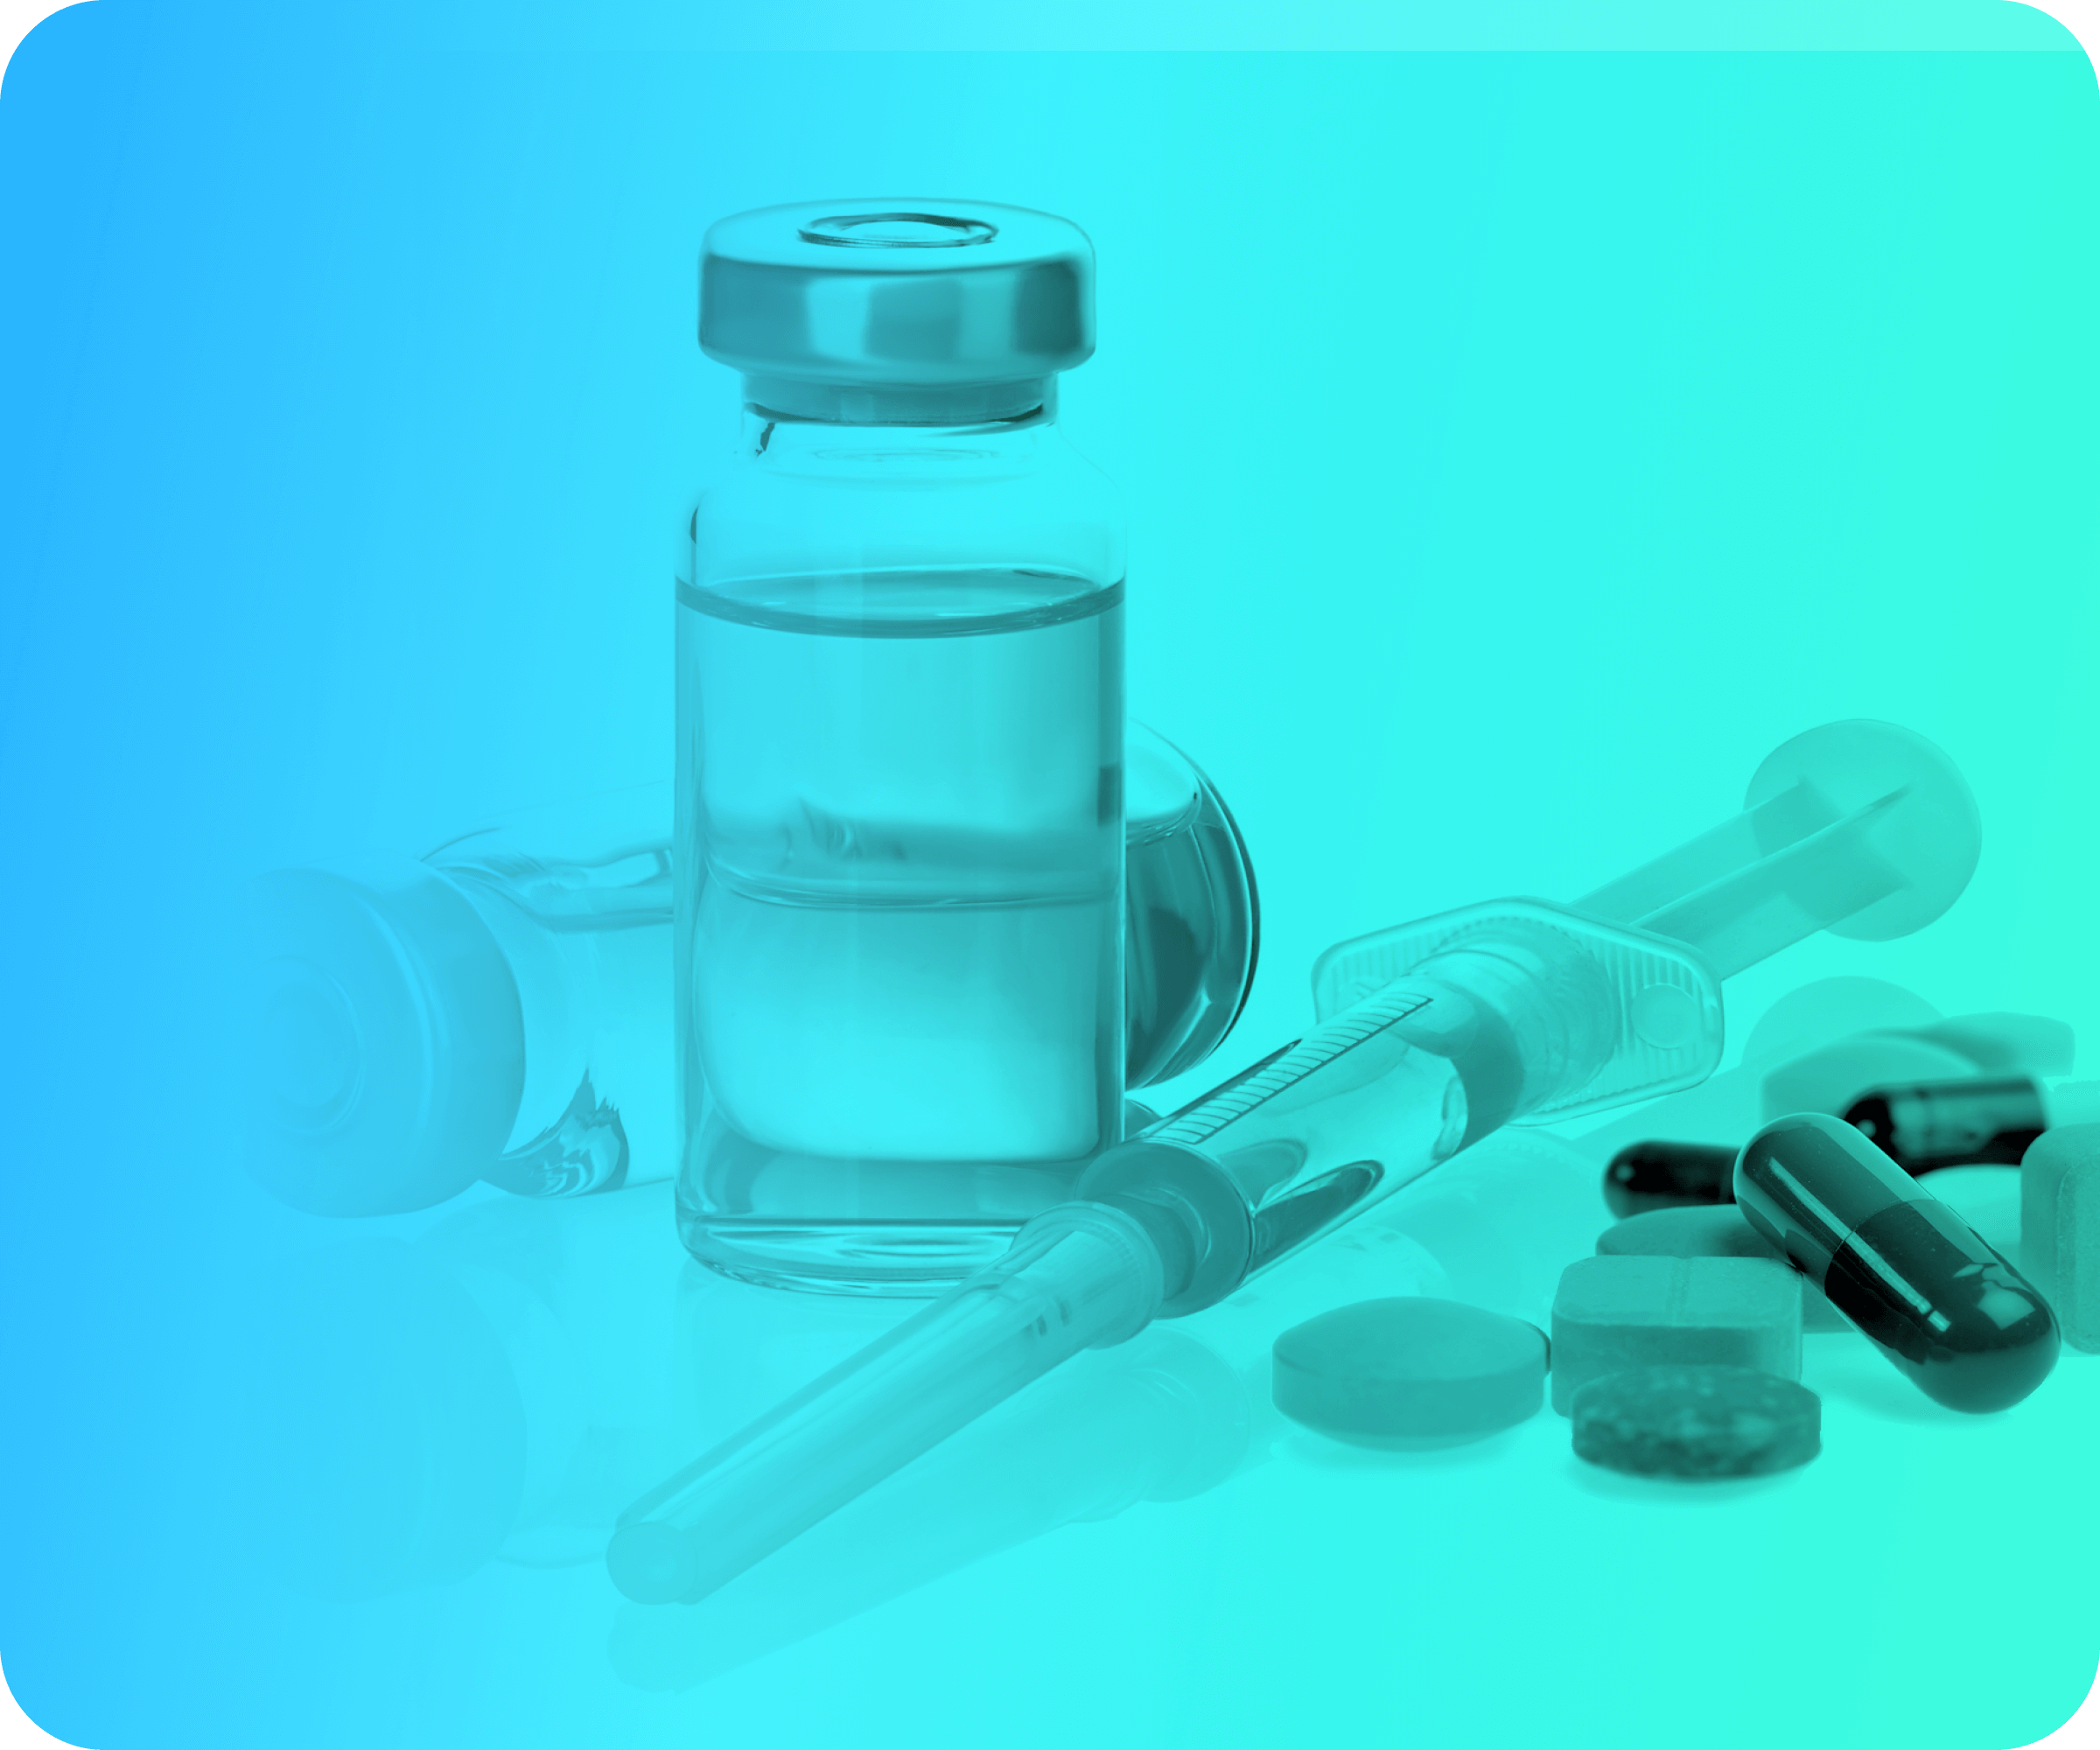 A grouping of medications including a vial, syringe, and pills